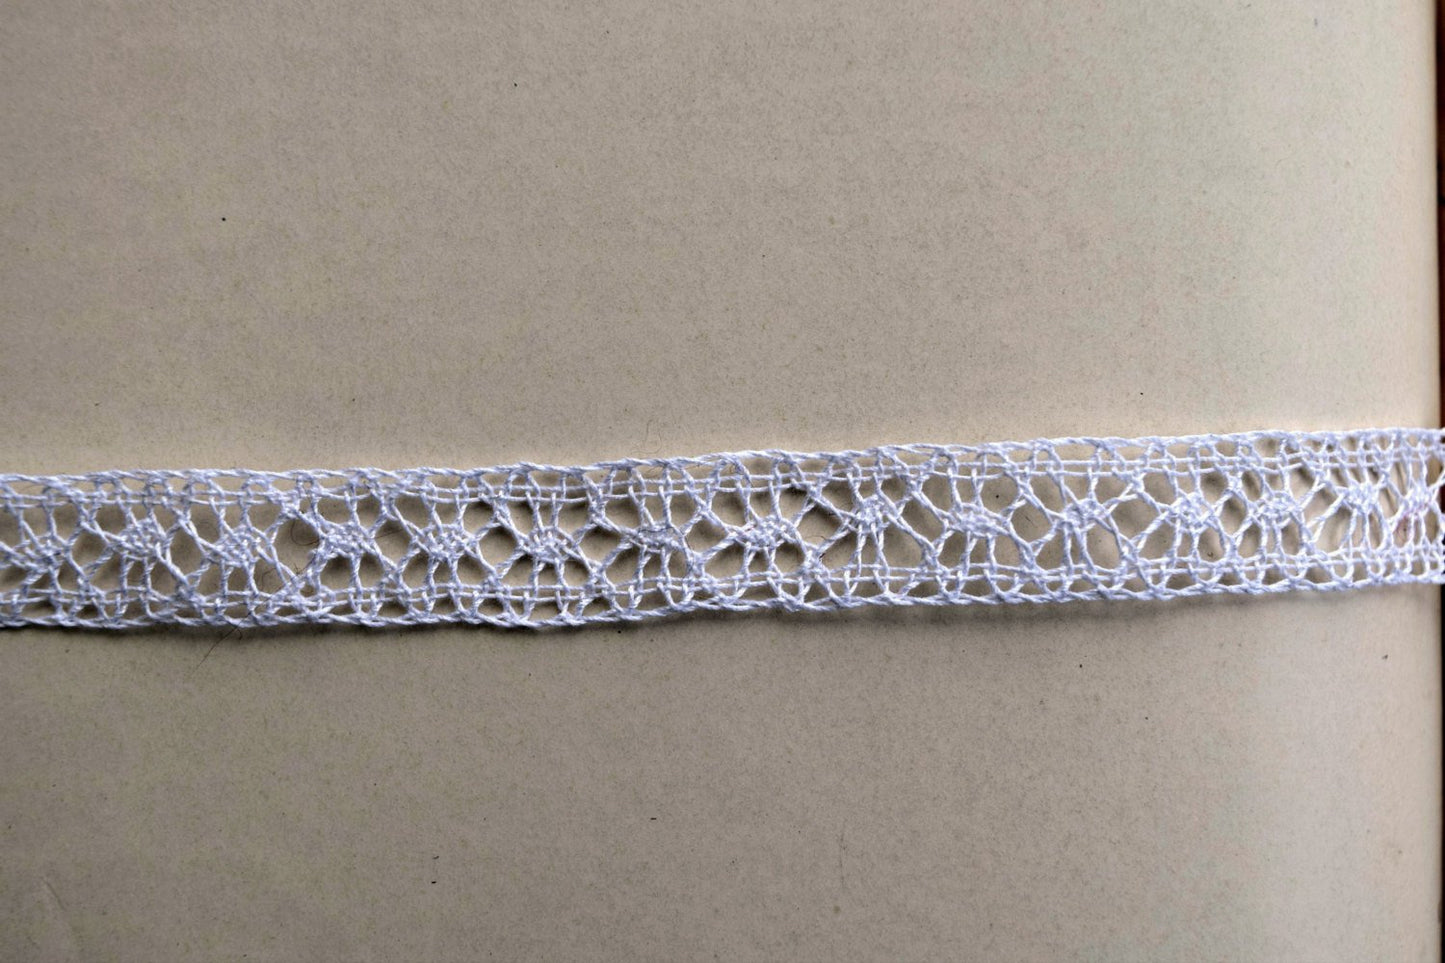 Closeup of handmade bobbin lace showing details of footside and spiders